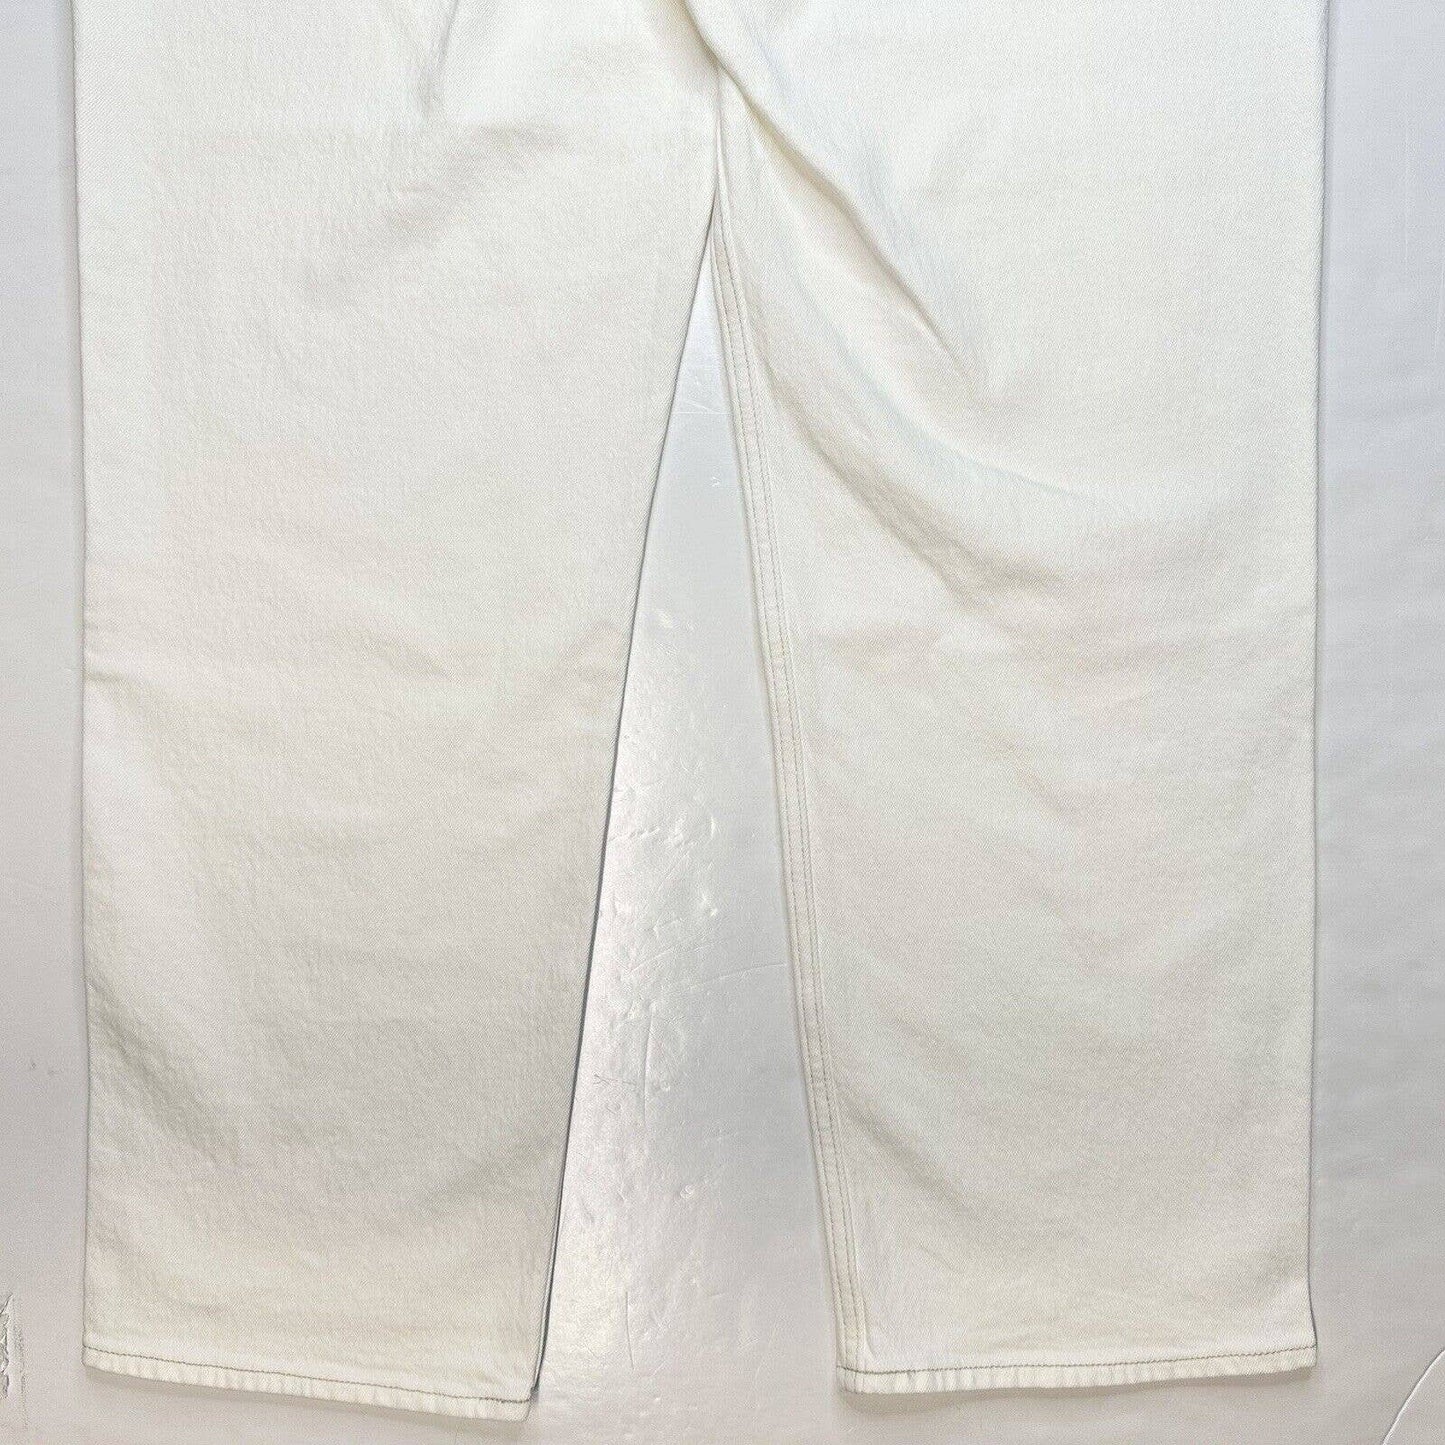 Abercrombie Fitch 90s Straight Ultra High Rise Jeans 34/18 Cream Crossover NEW